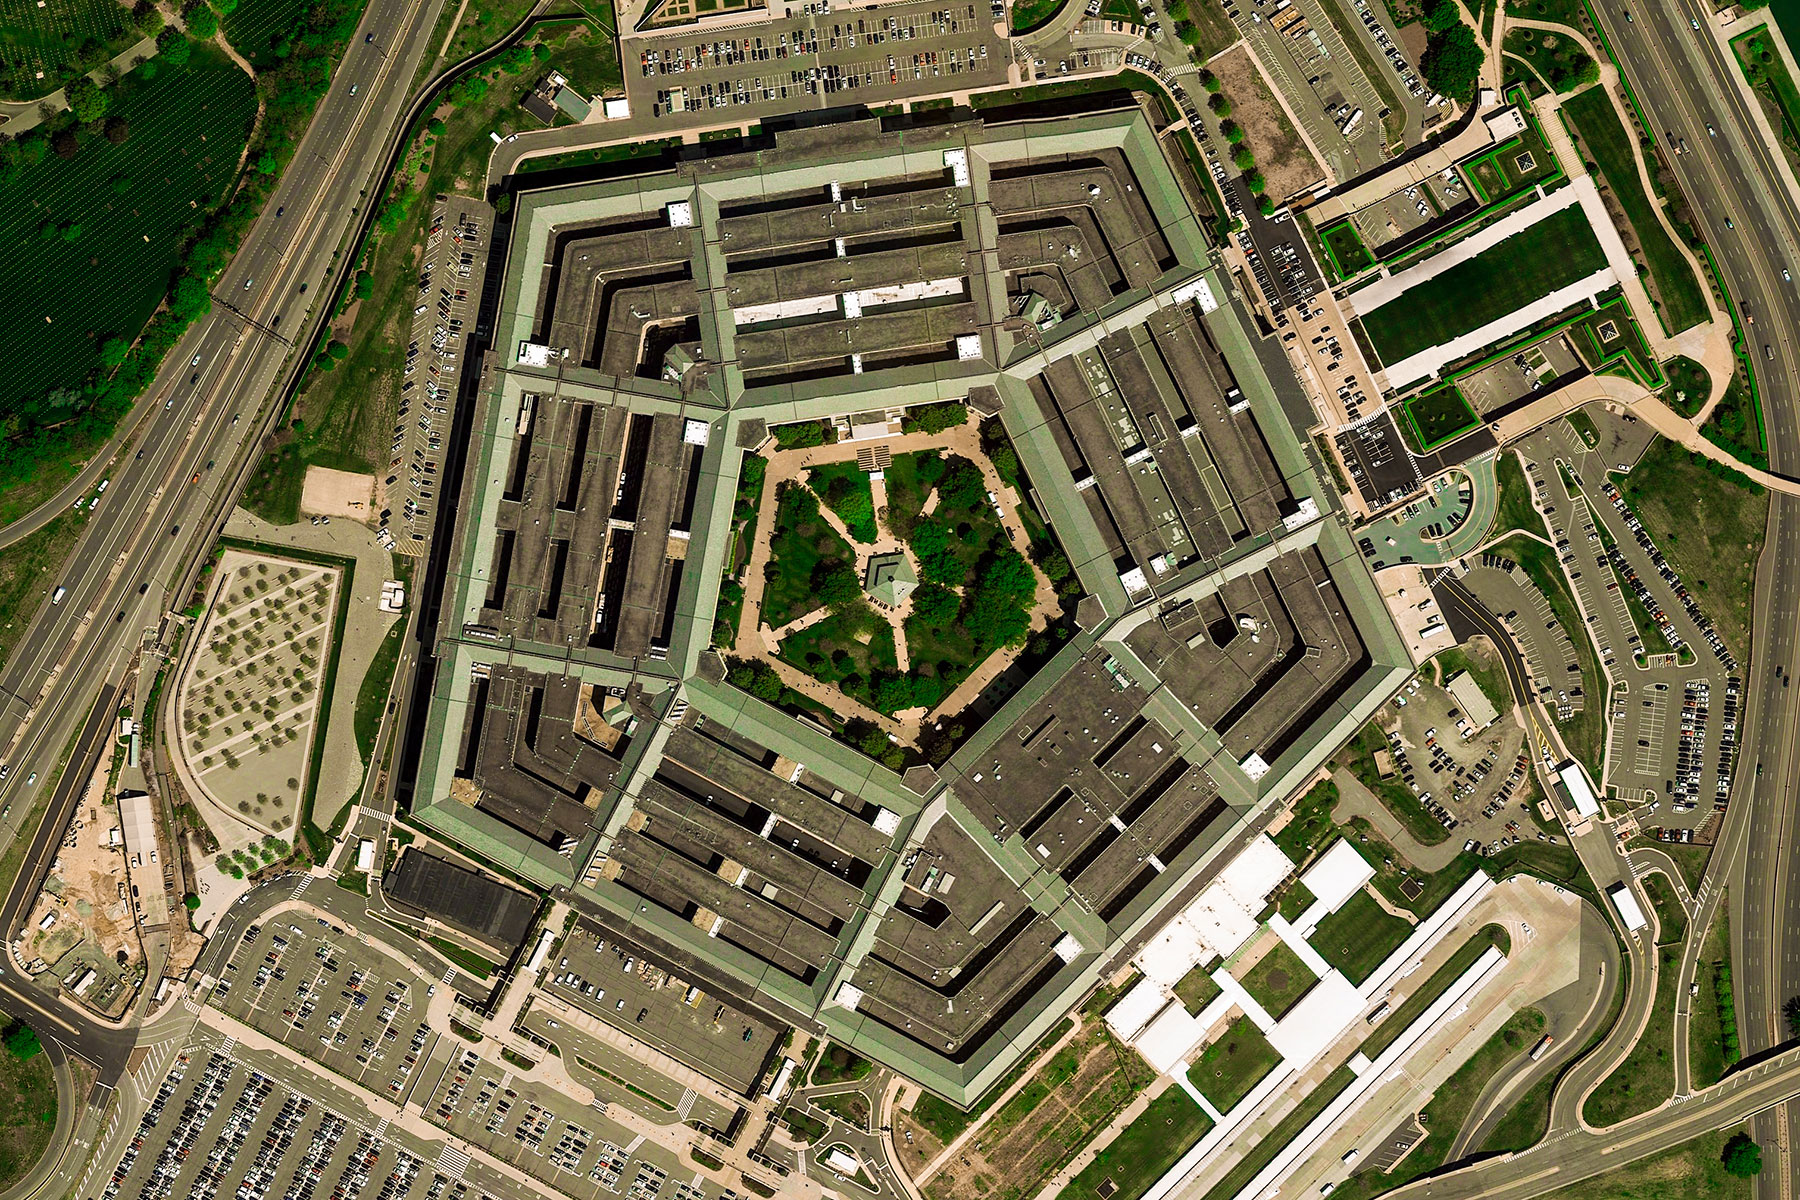 DoD news, Department of Defense news, Pentagon news, US news, US security news, US national security news, United States news, Mike McCord, America, Peter Isackson